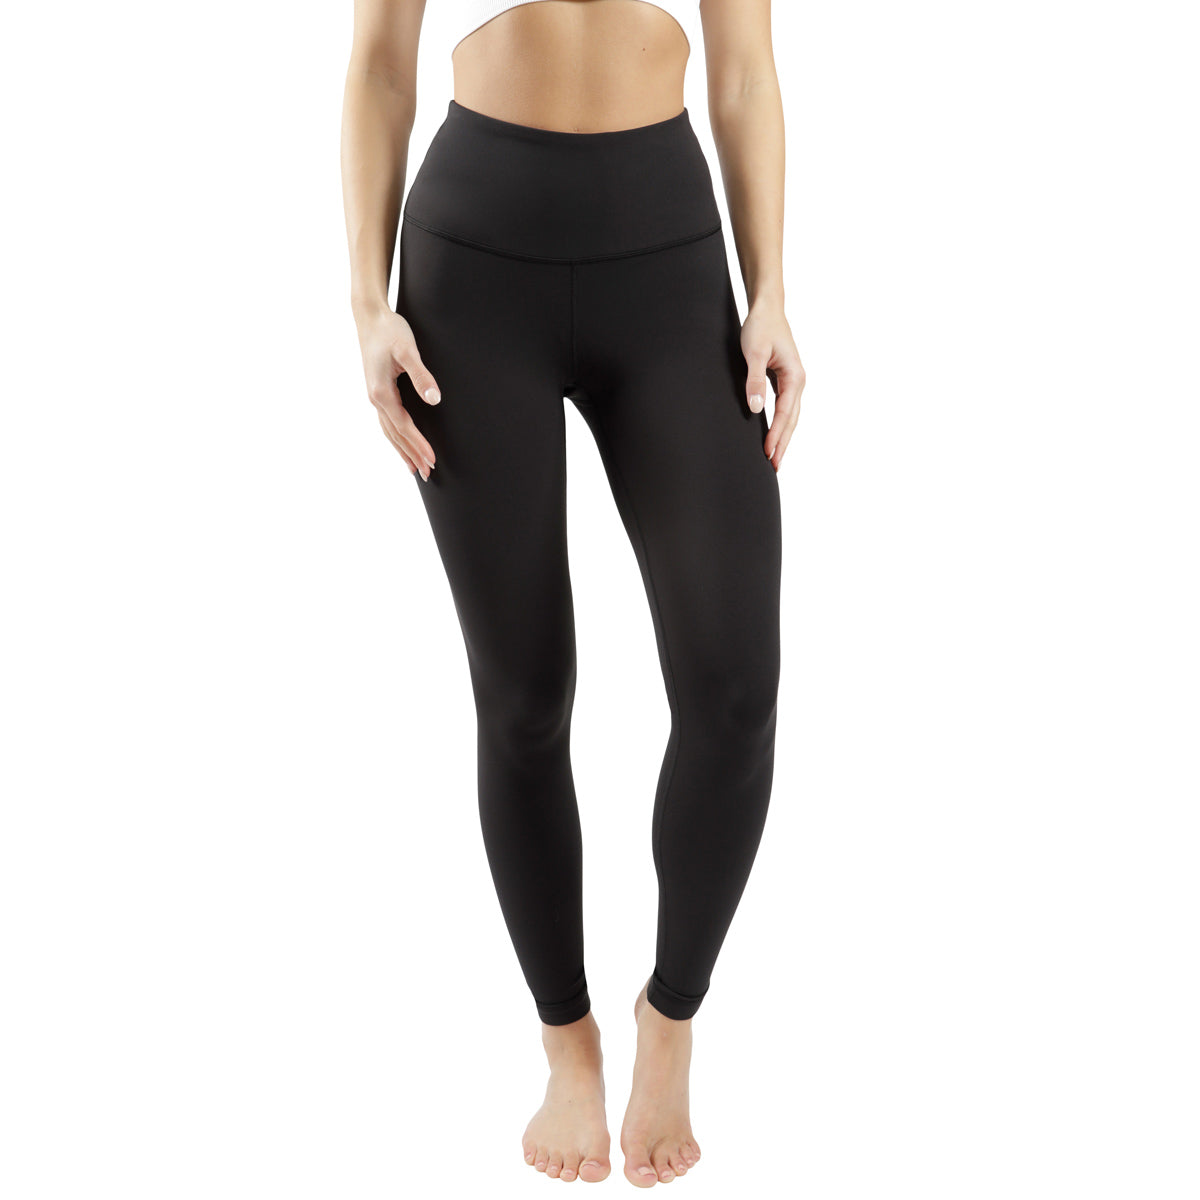 Yogalicious Pink Yoga Pants Size S - 86% off